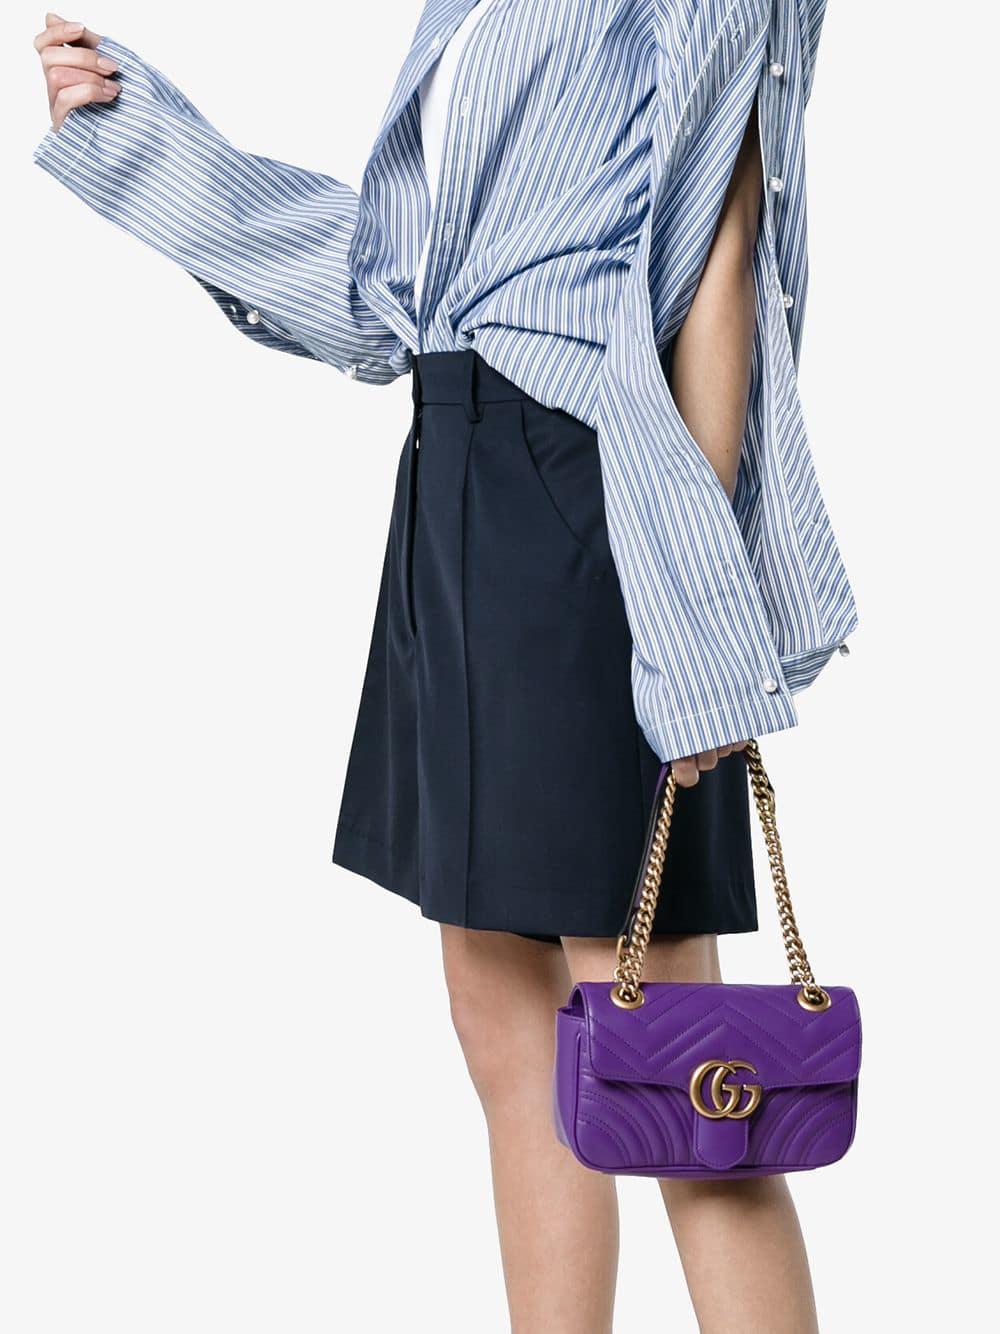 Gucci Purple Quilted Leather Marmont Mini Camera Bag - Yoogi's Closet